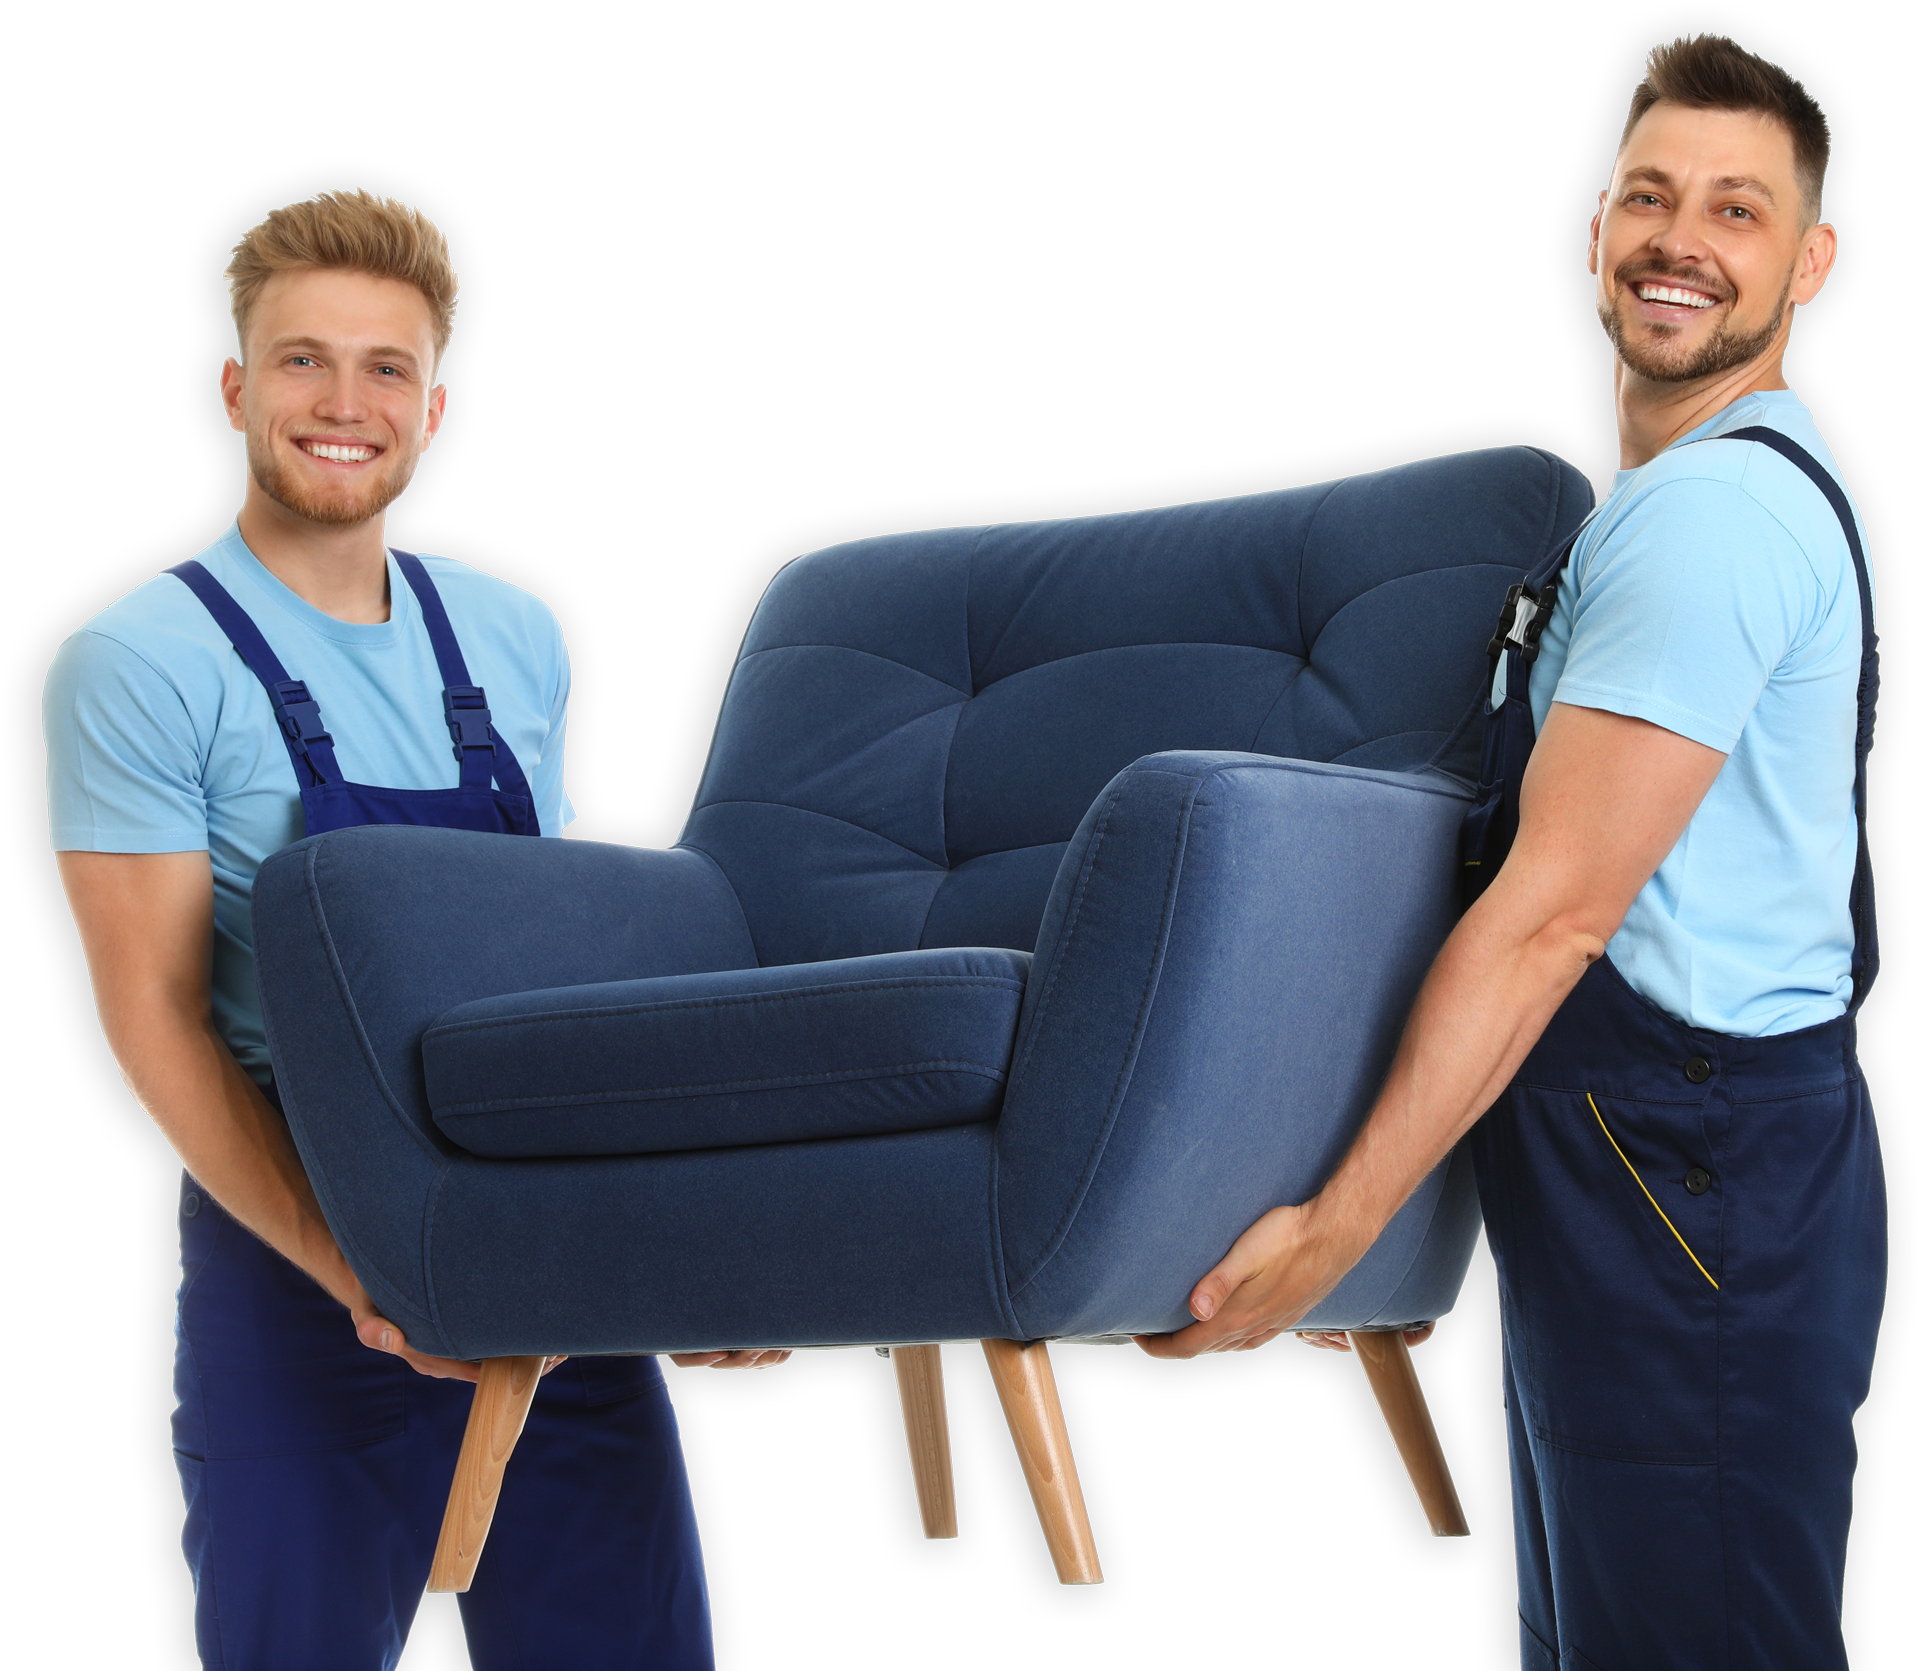 Two Men in Blue Overalls Are Carrying a Blue Chair